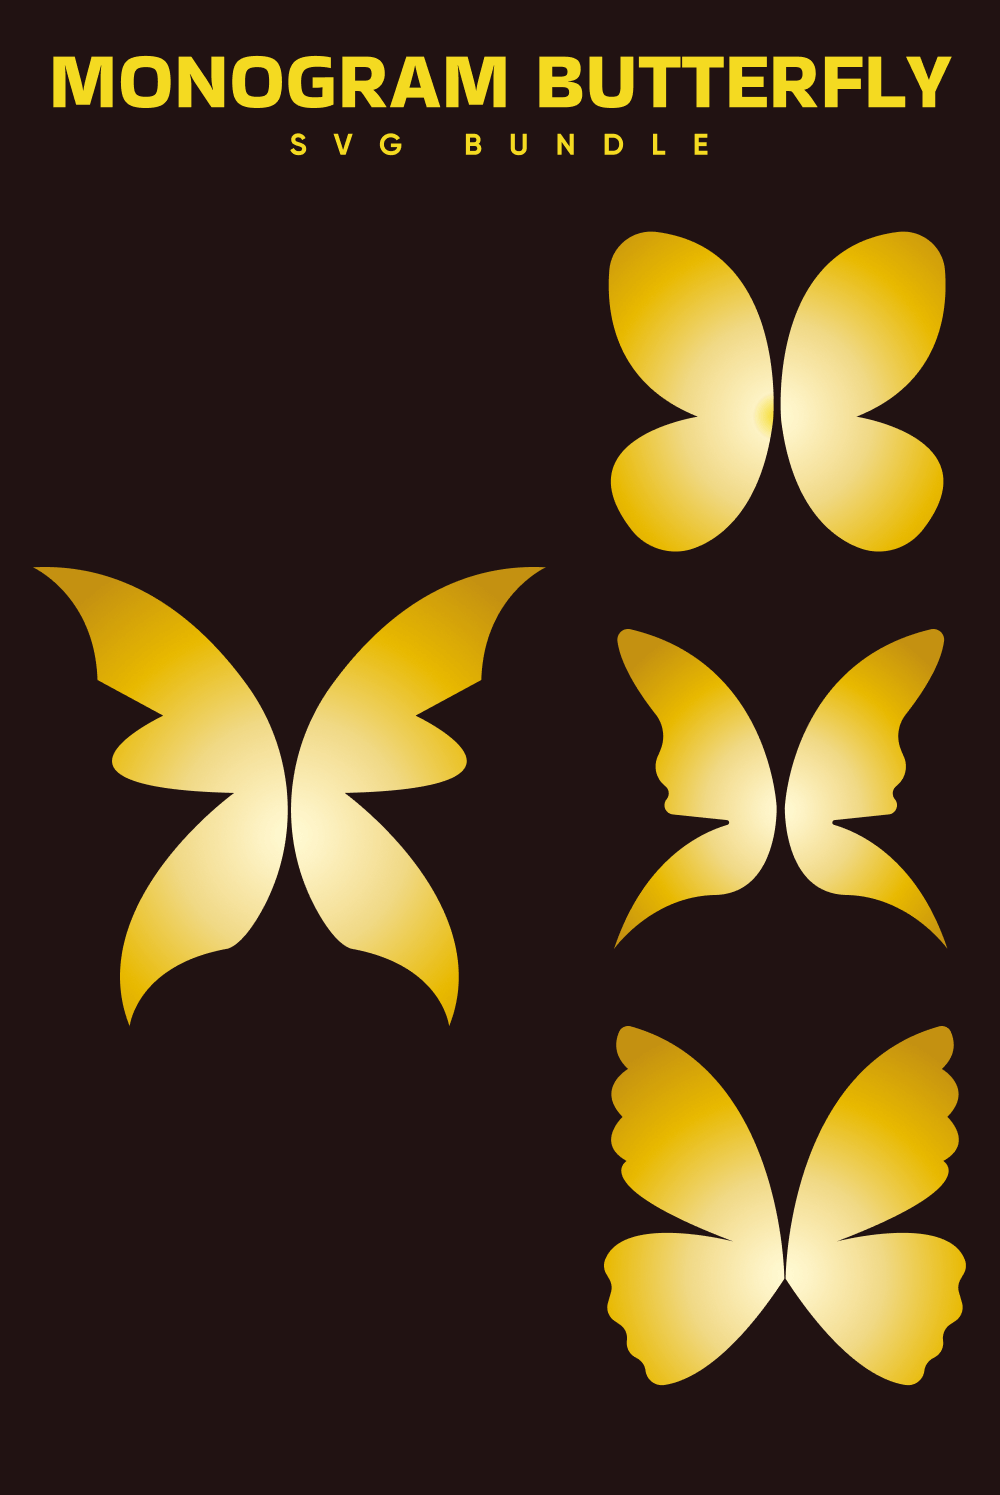 Set of yellow butterflies on a black background.